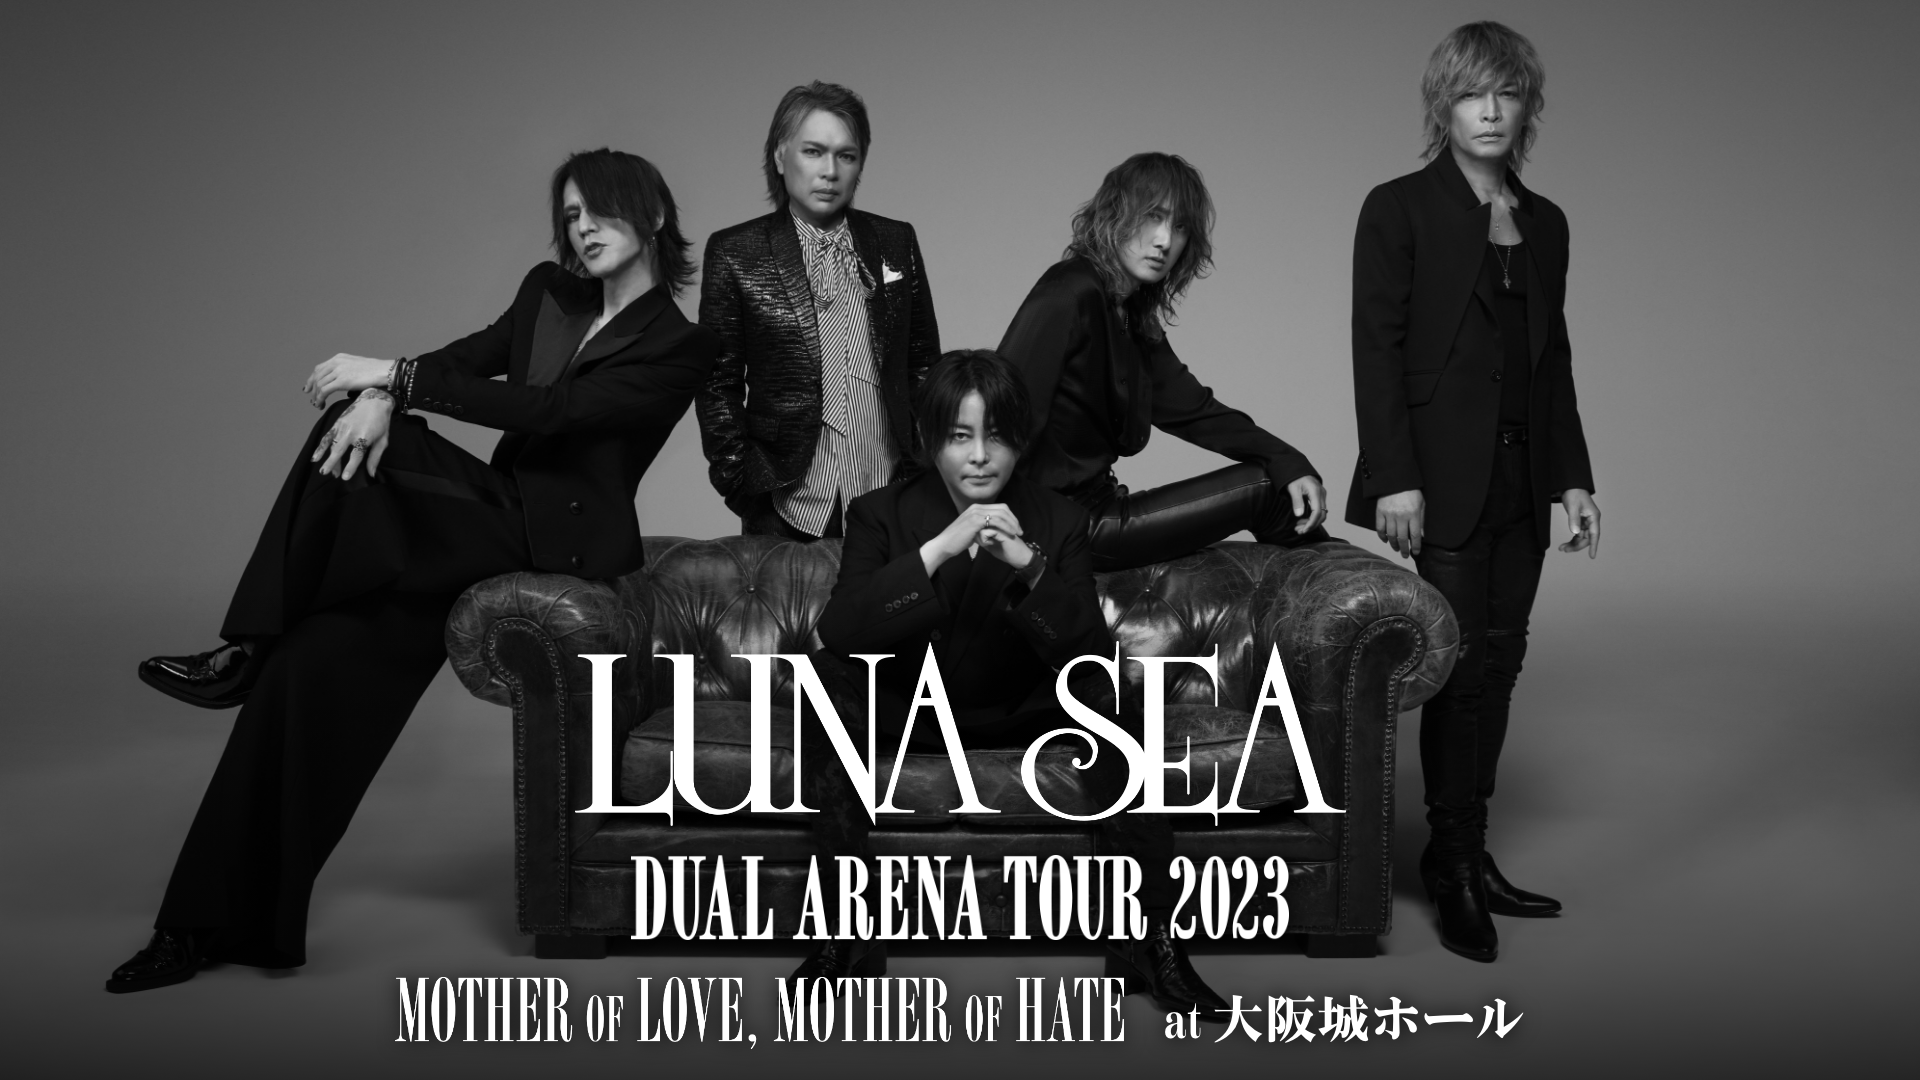 LUNA SEA DUAL ARENA TOUR 2023 -END OF DUAL- MOTHER OF, LOVE MOTHER OF HATE